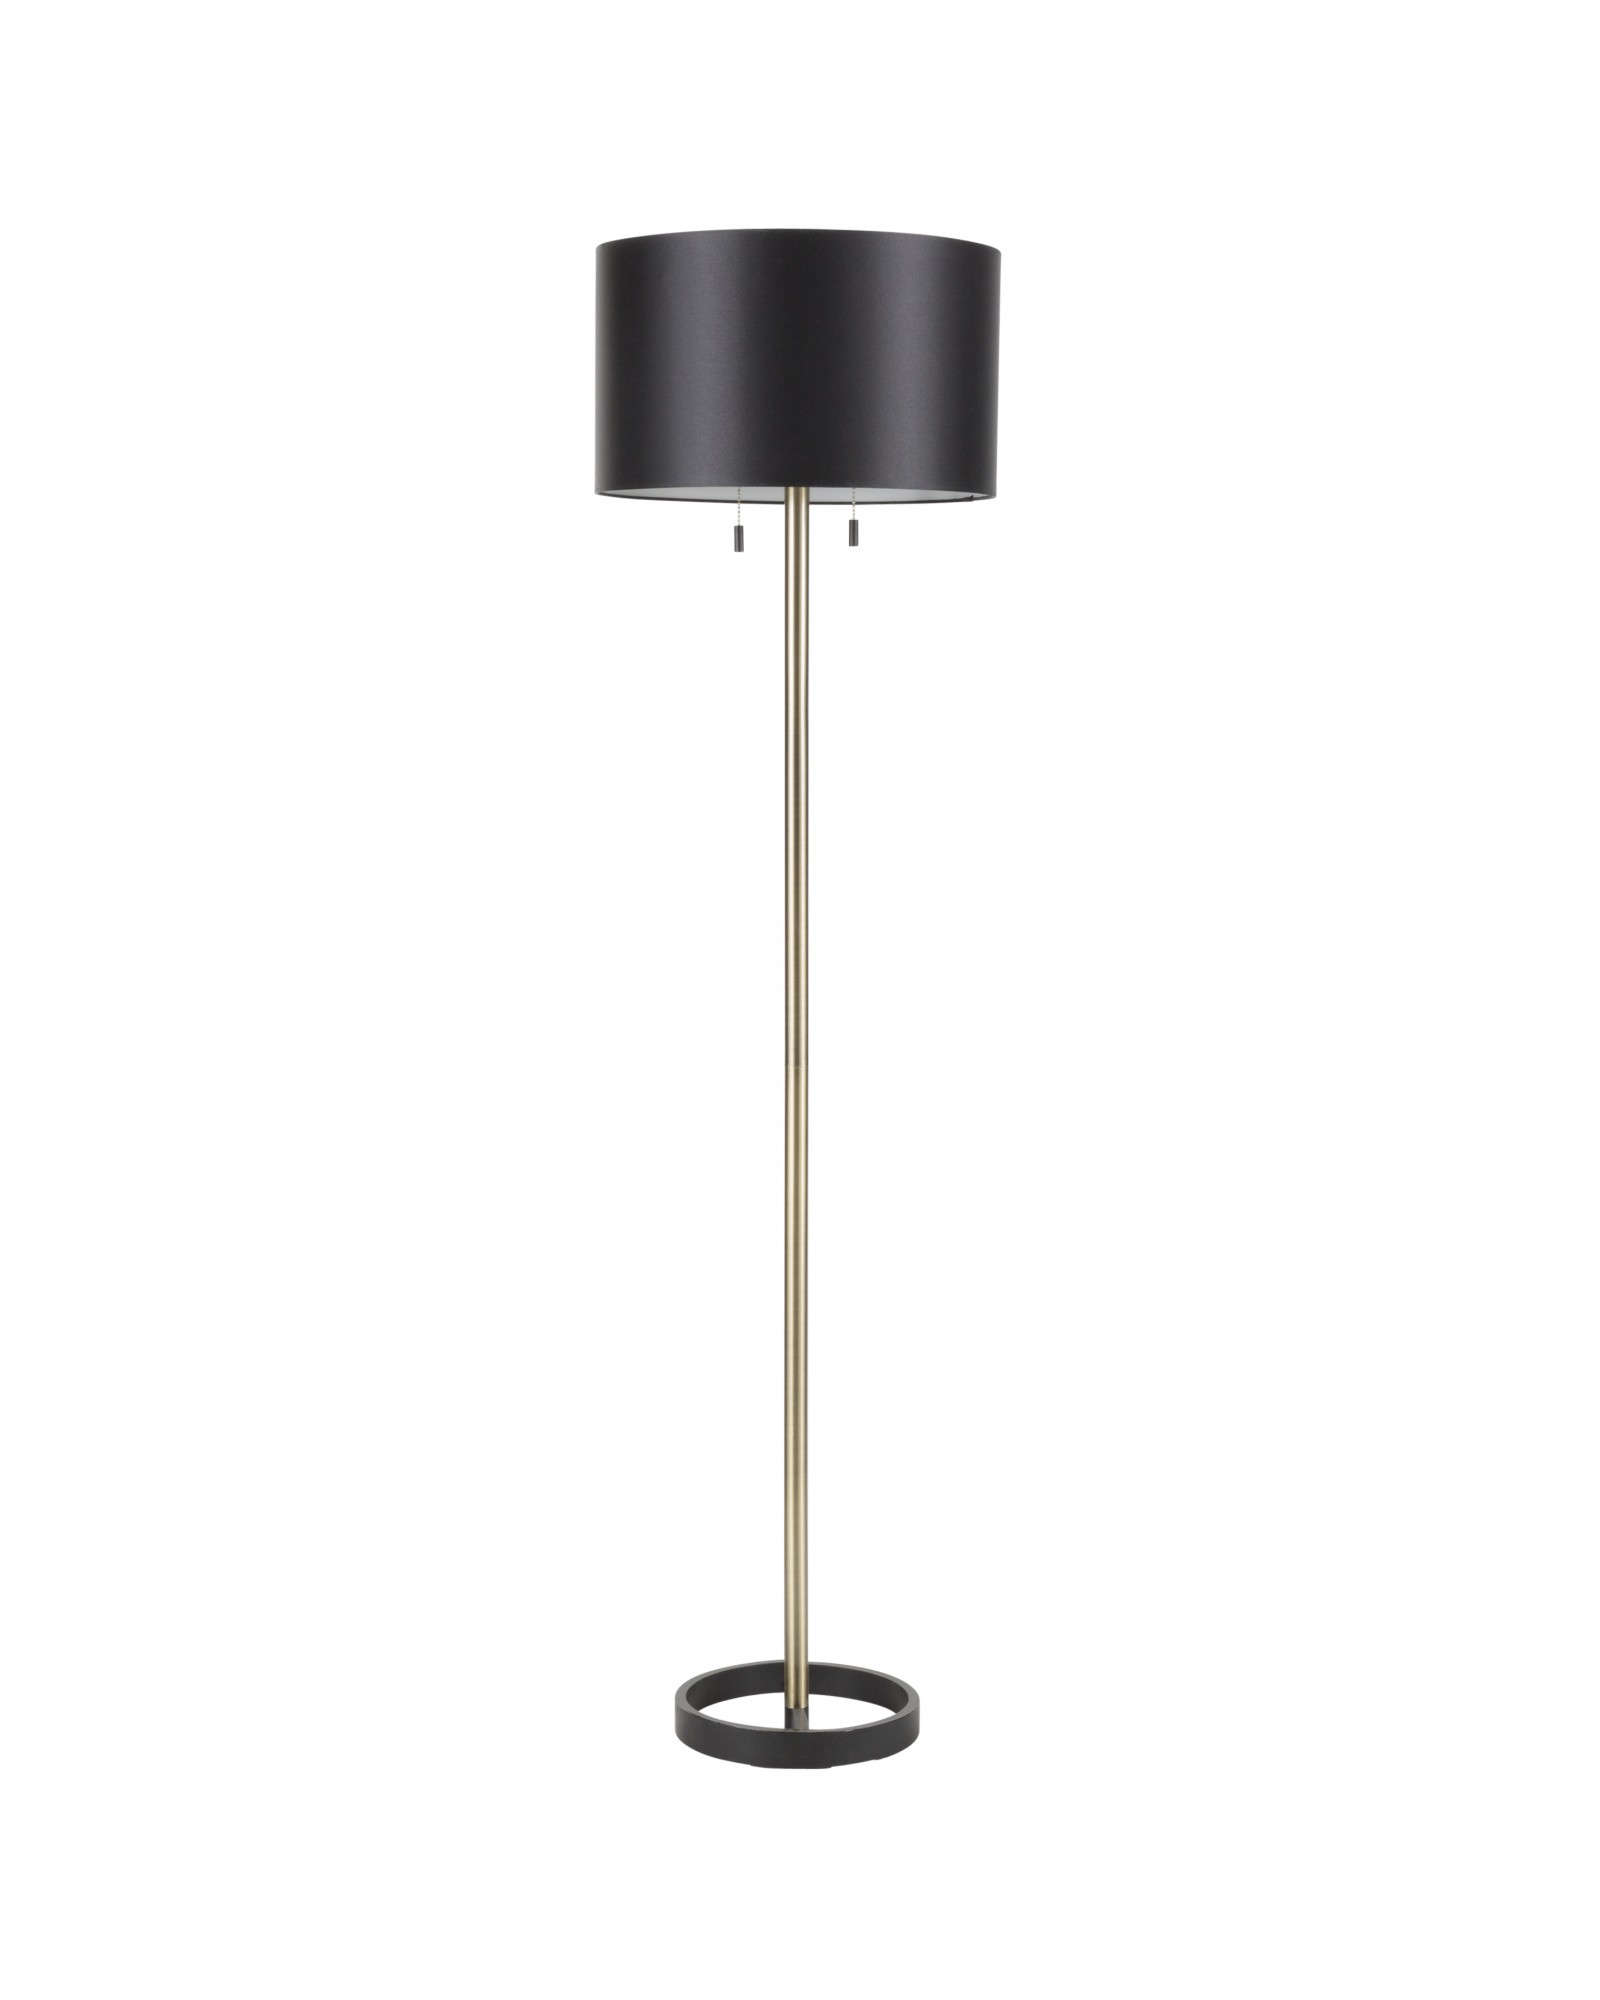 Hilton Contemporary Floor Lamp in Black with Gold Accents